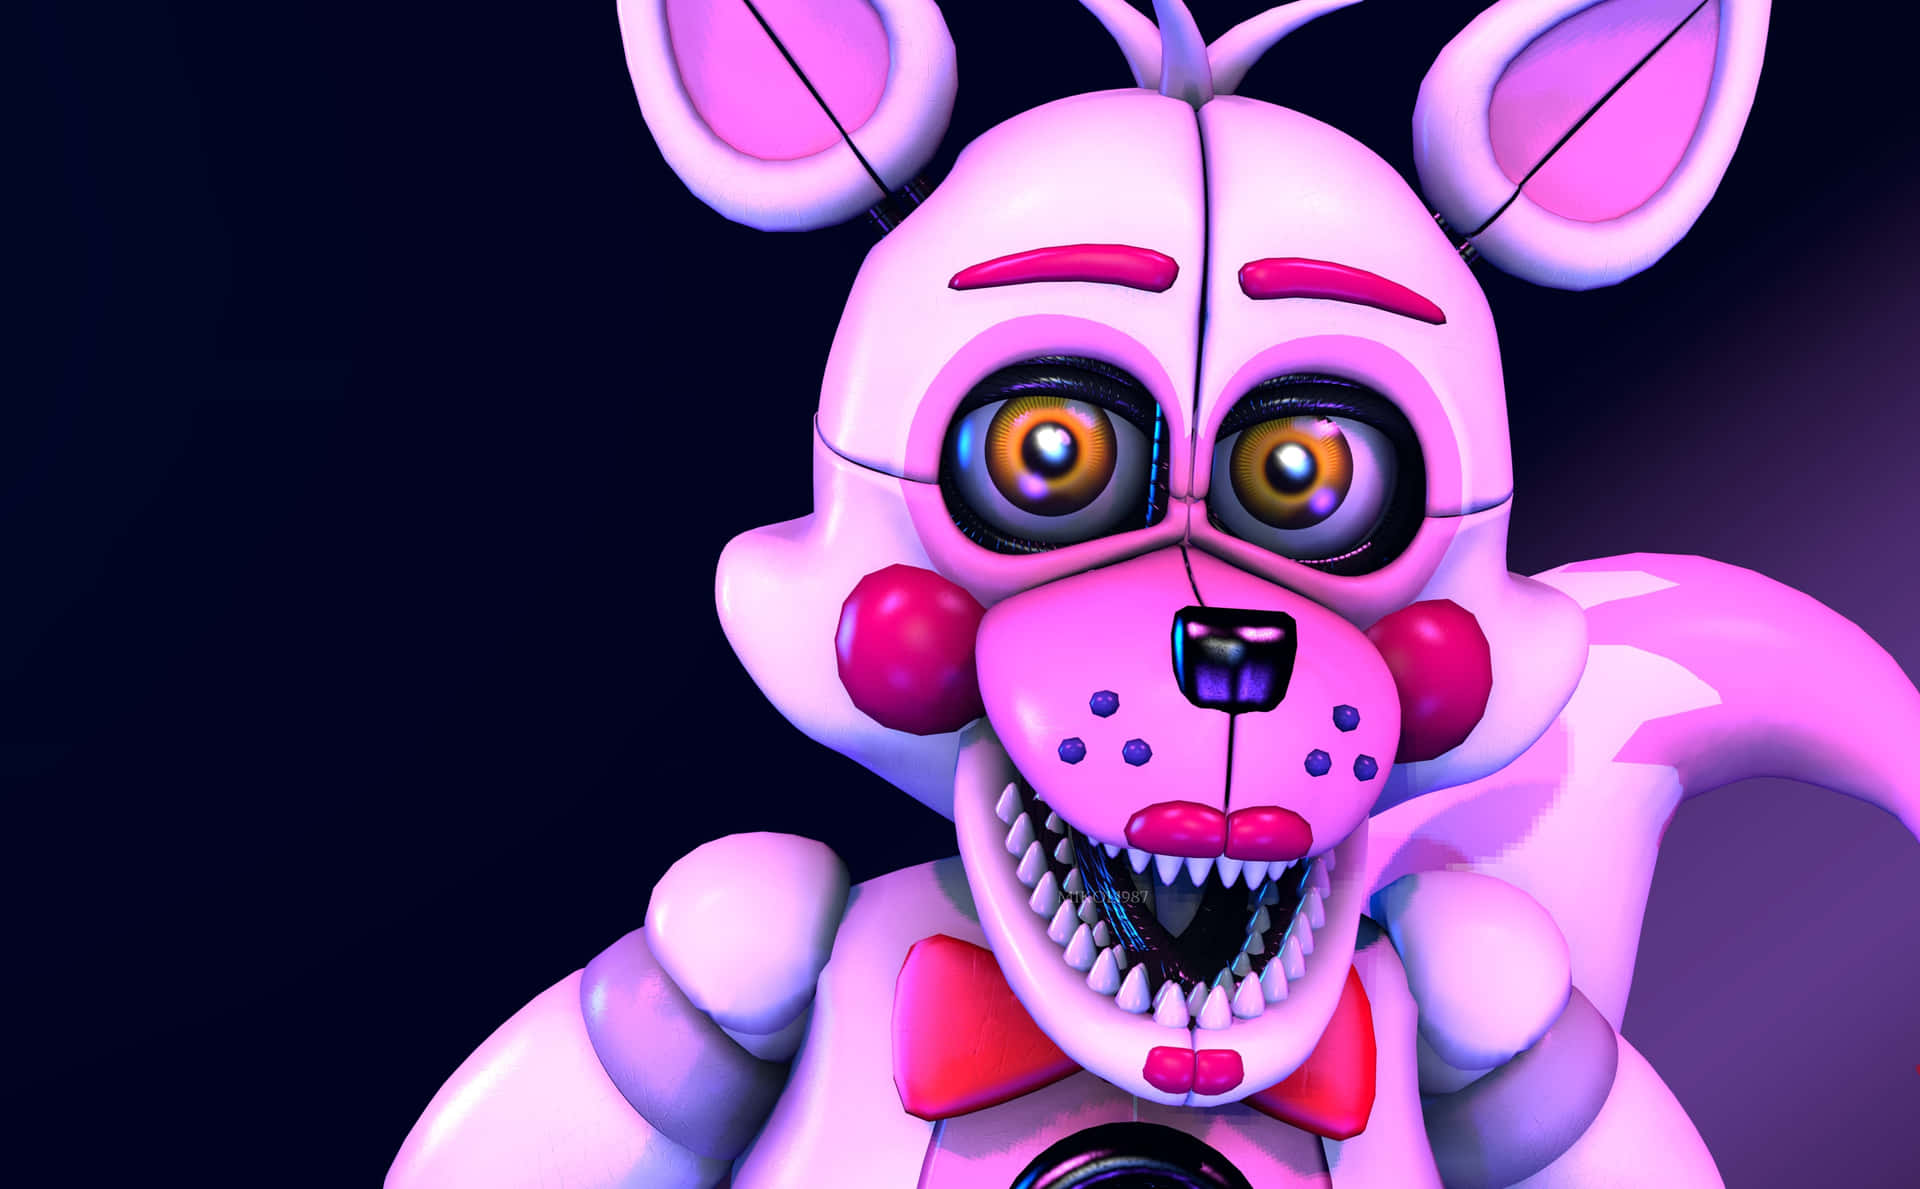 A colorful rendition of Funtime Foxy entertaining at a party Wallpaper